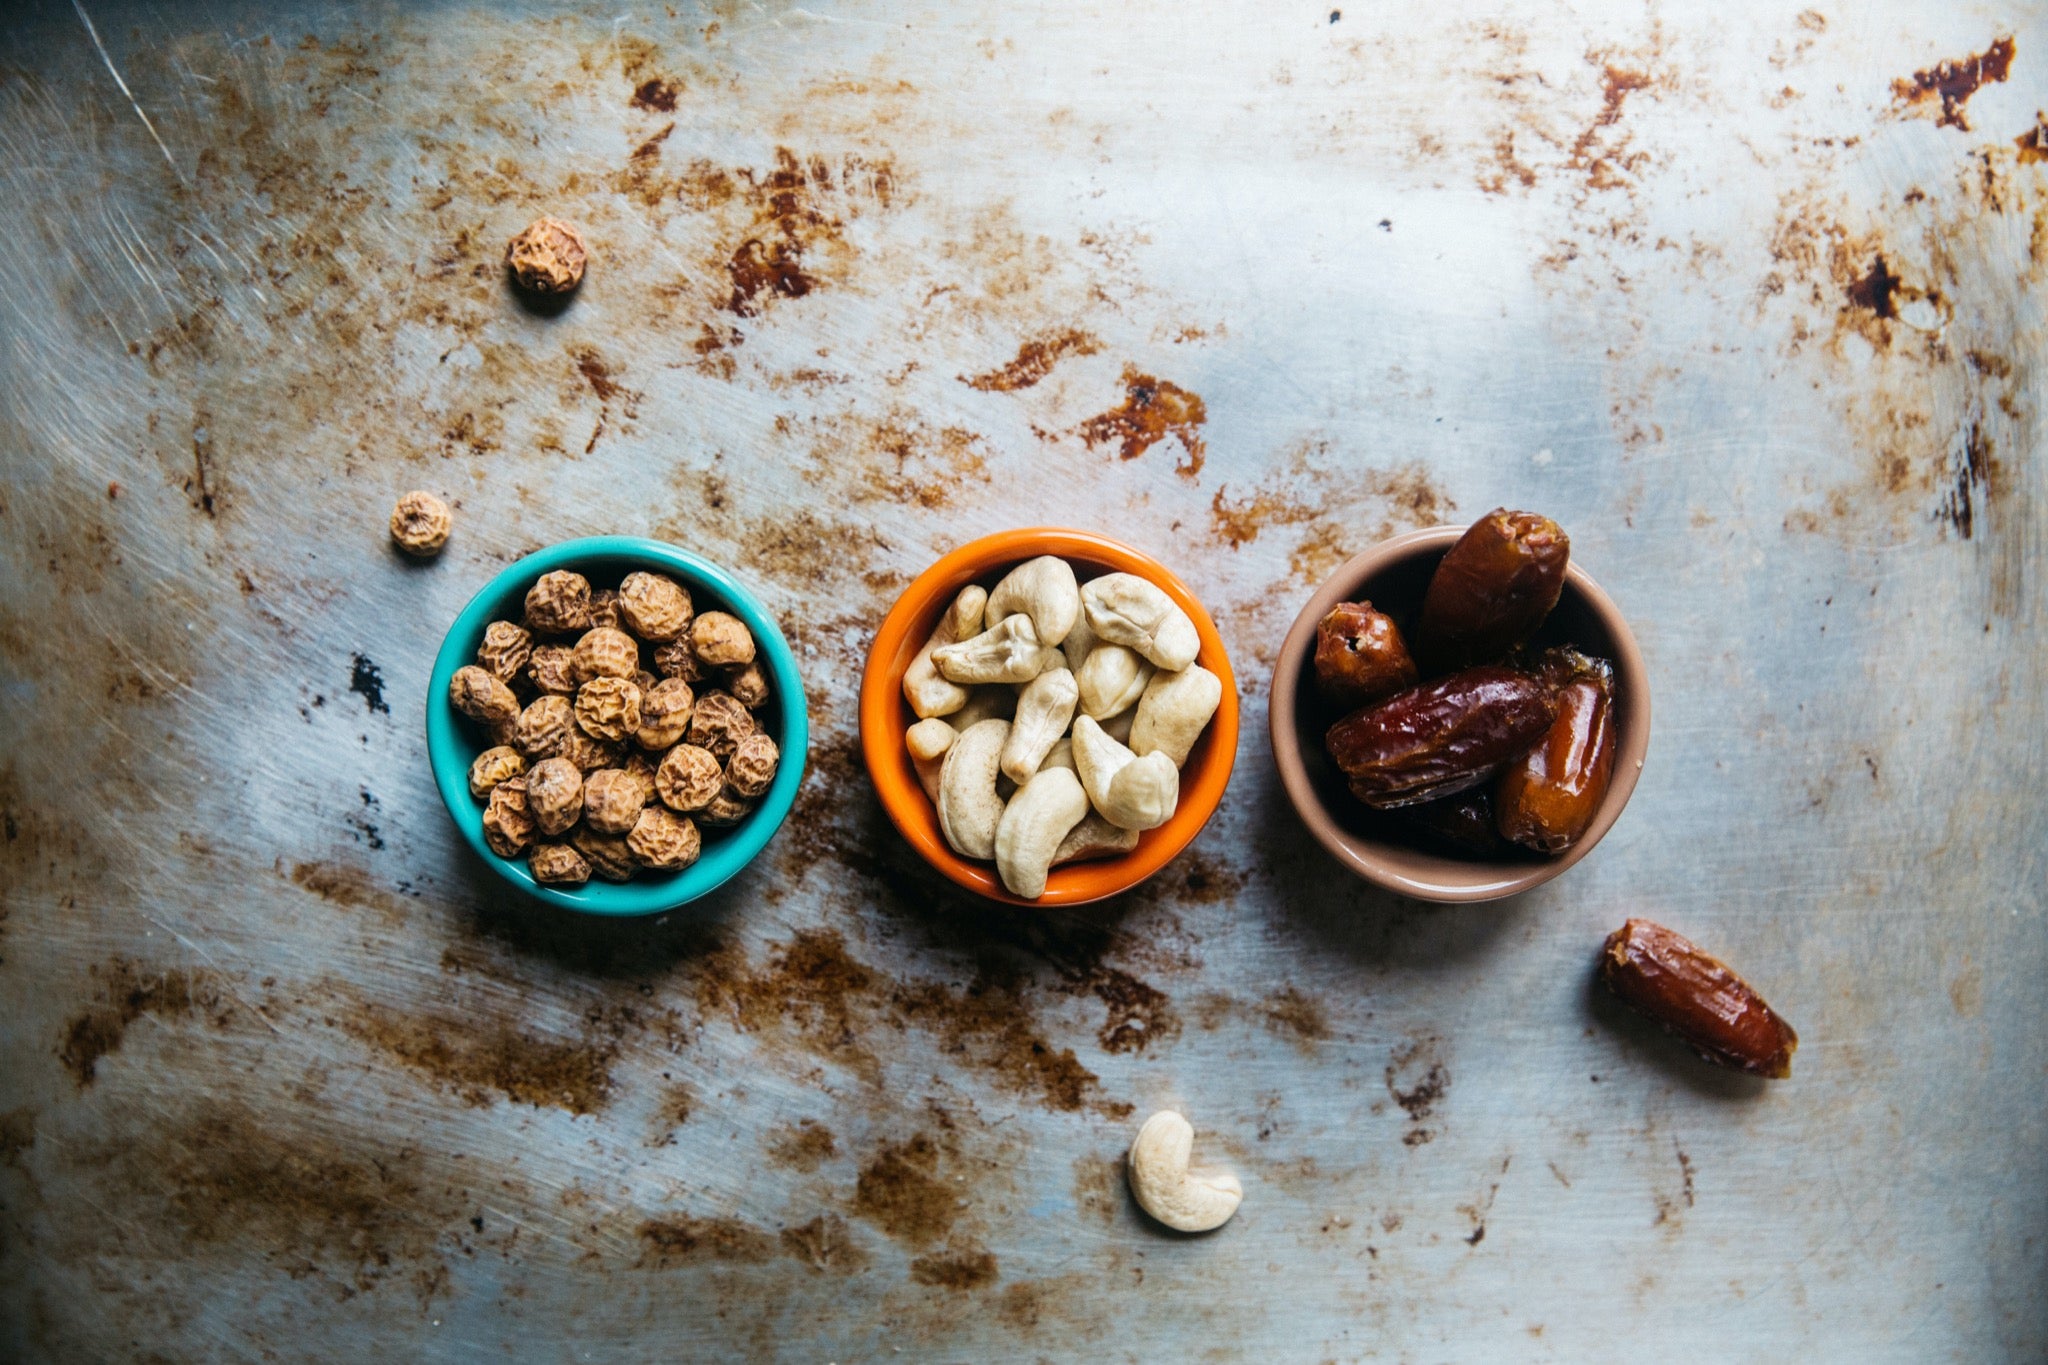 Healthy snack of nuts and dates